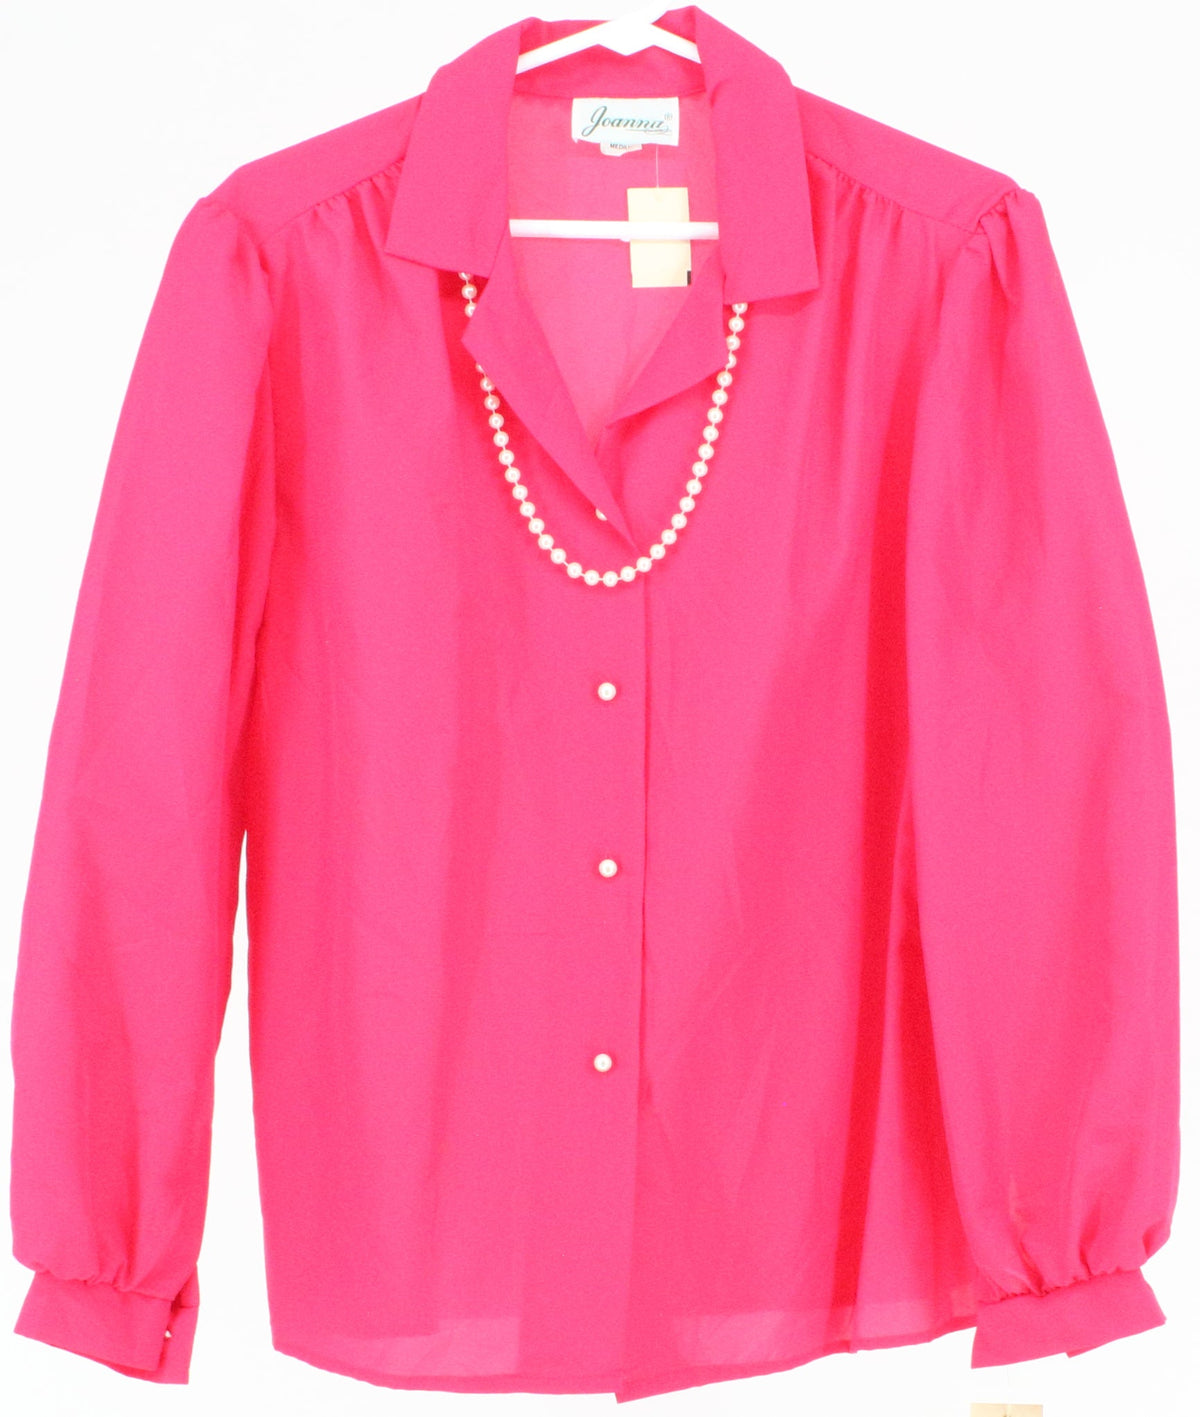 Joanna Pink Blouse With Pearl Necklace